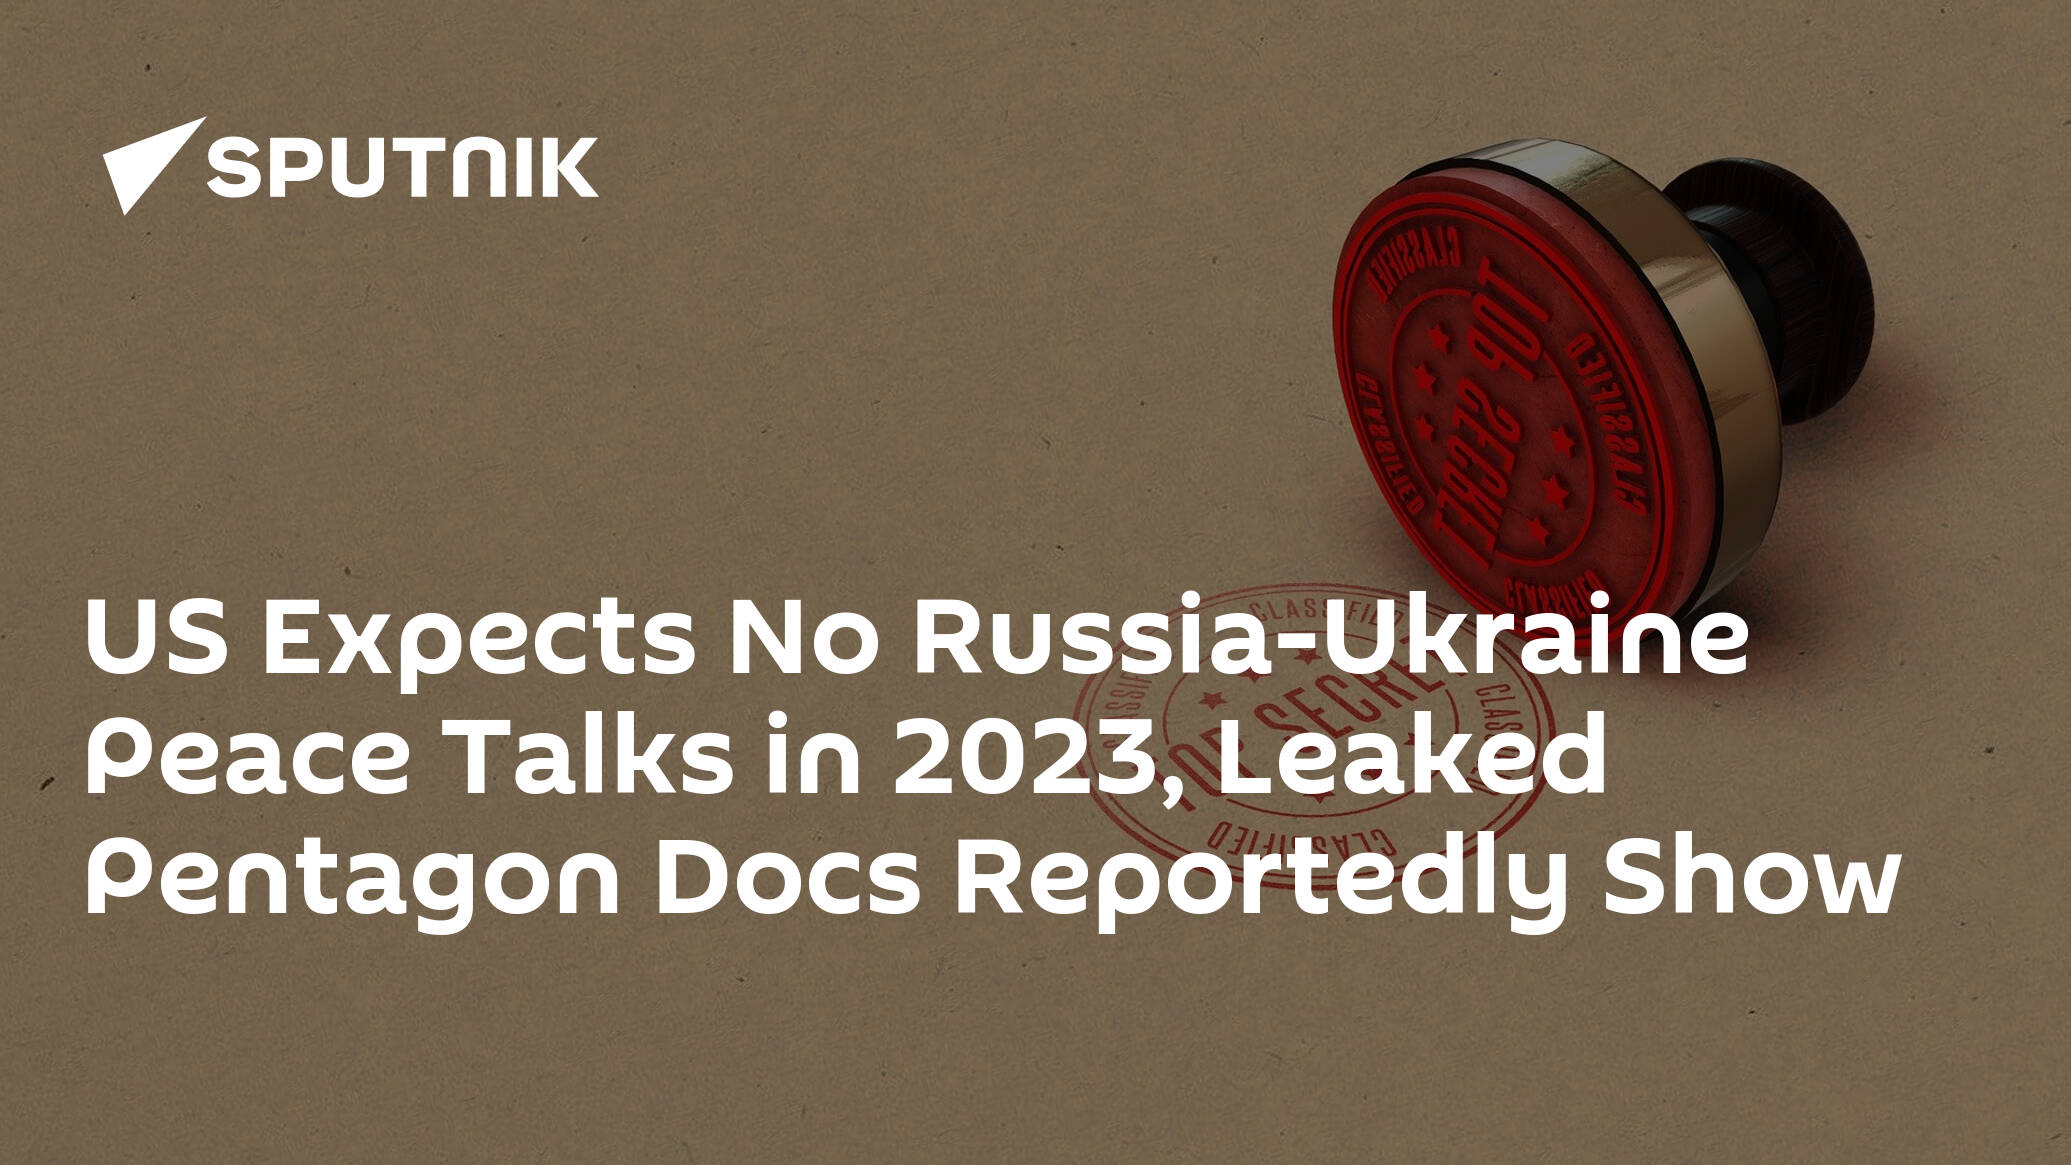 US Expects No Russia-Ukraine Peace Talks in 2023, Leaked Pentagon Docs Reportedly Show